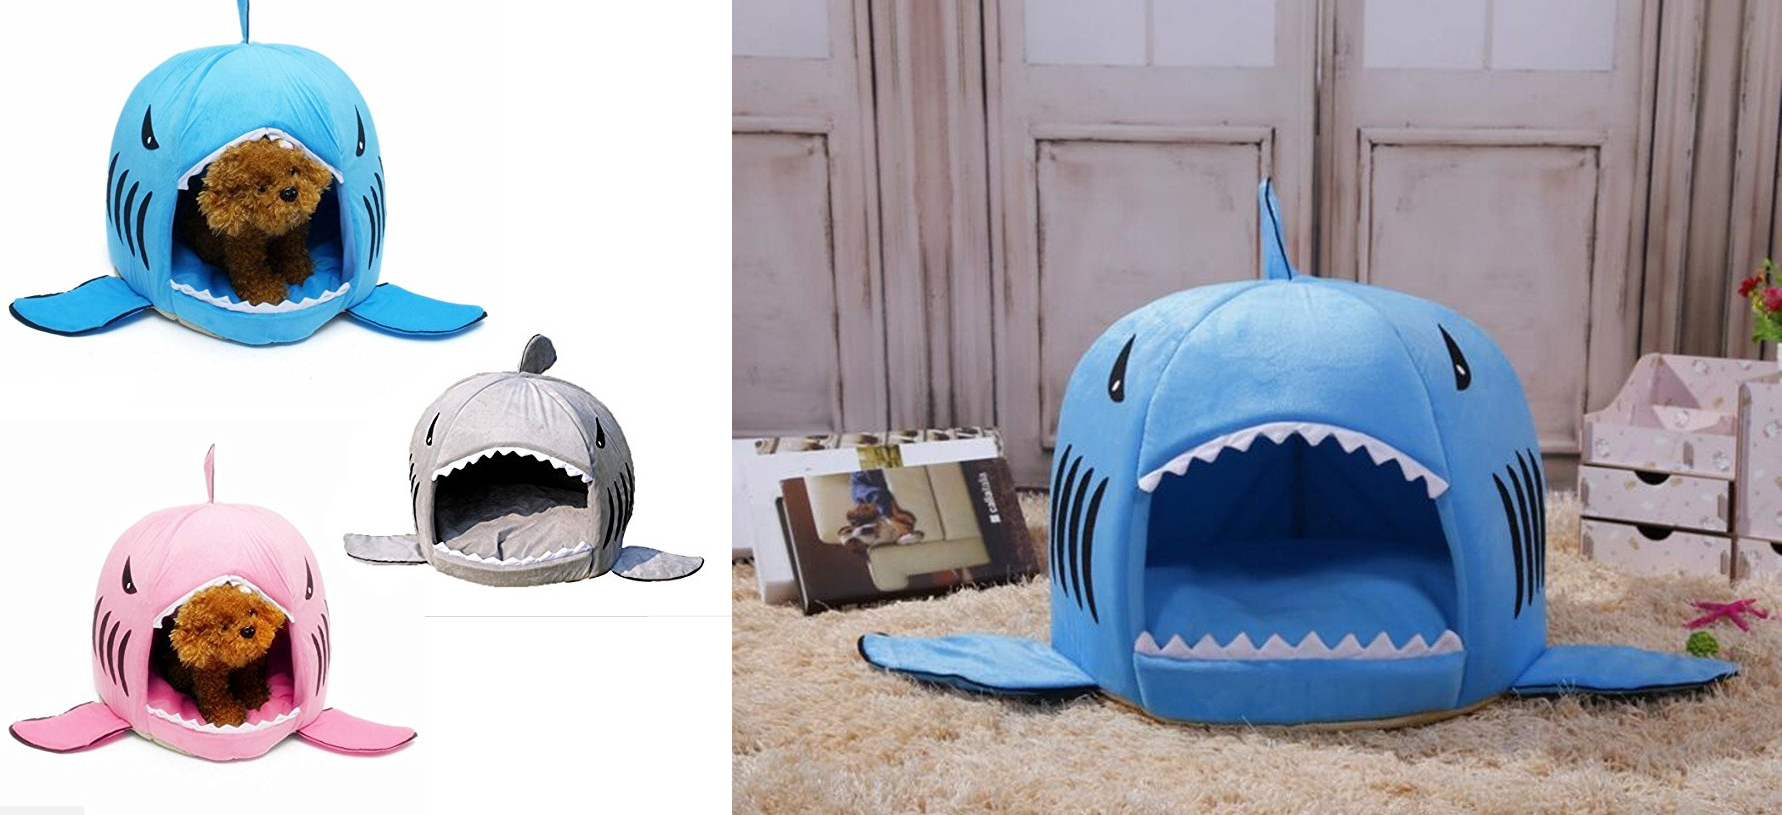 funny-dog-cat-gift-ideas-pet-bed-kamier-shark-round-washable-soft-cotton-dog-cat-pet-bed